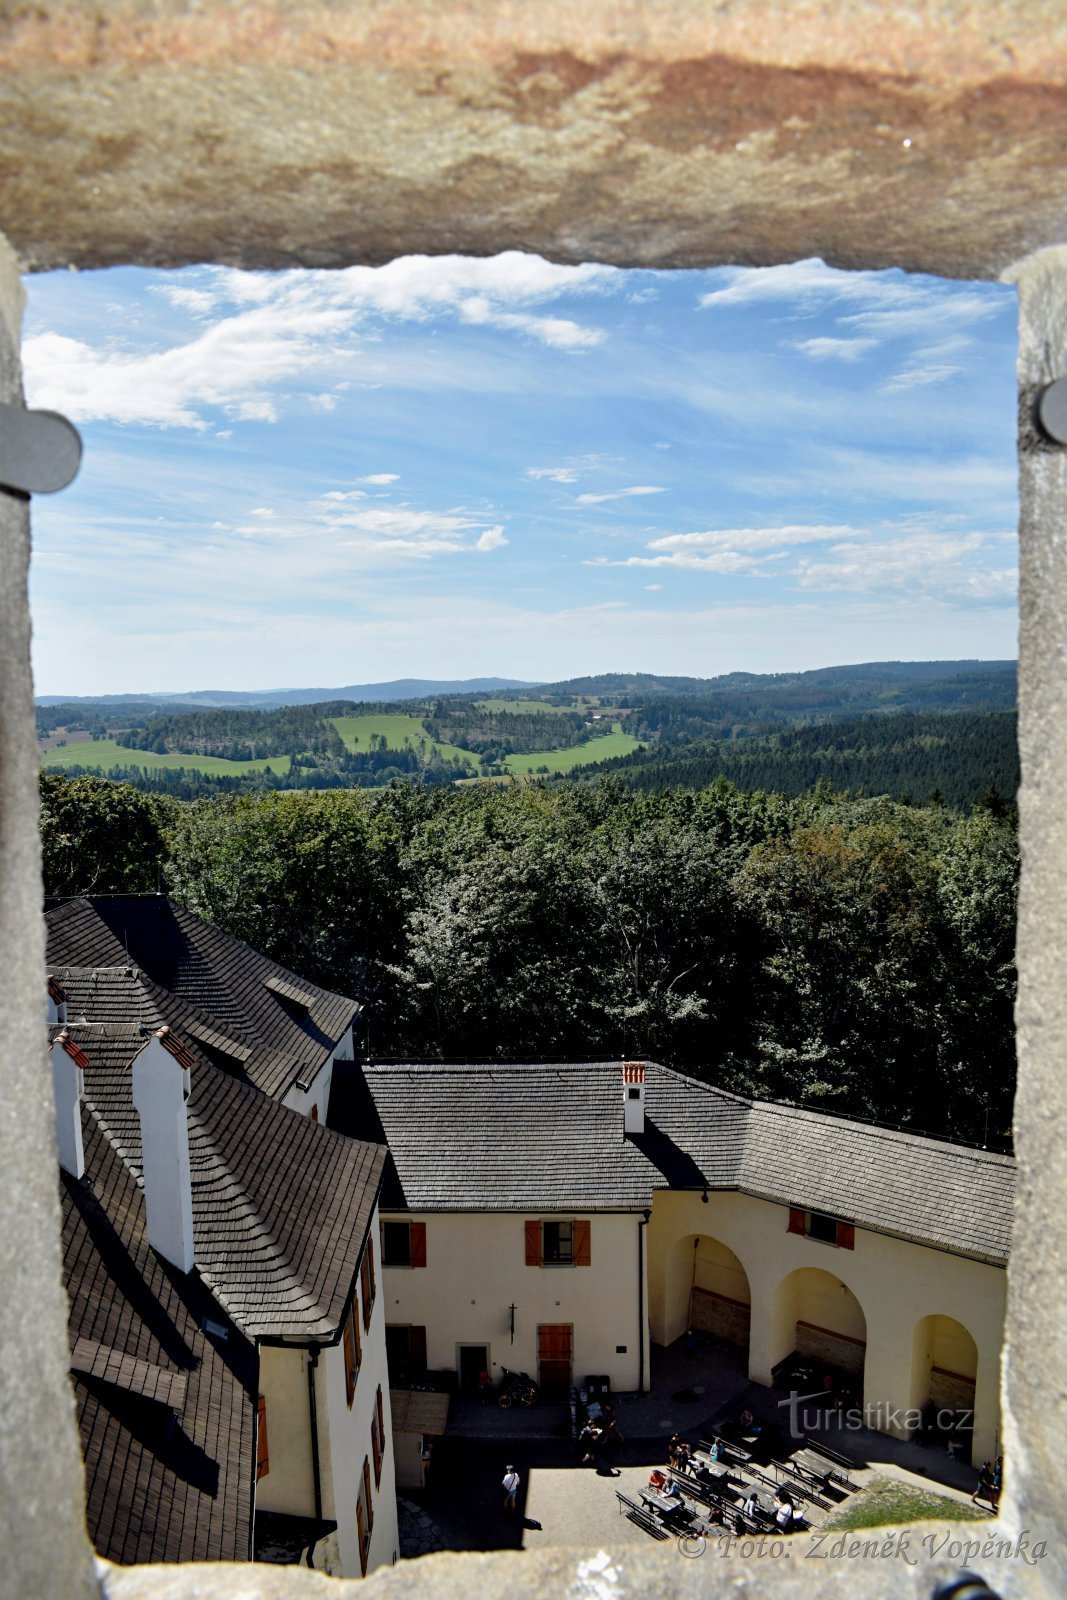 View from the castle tower.